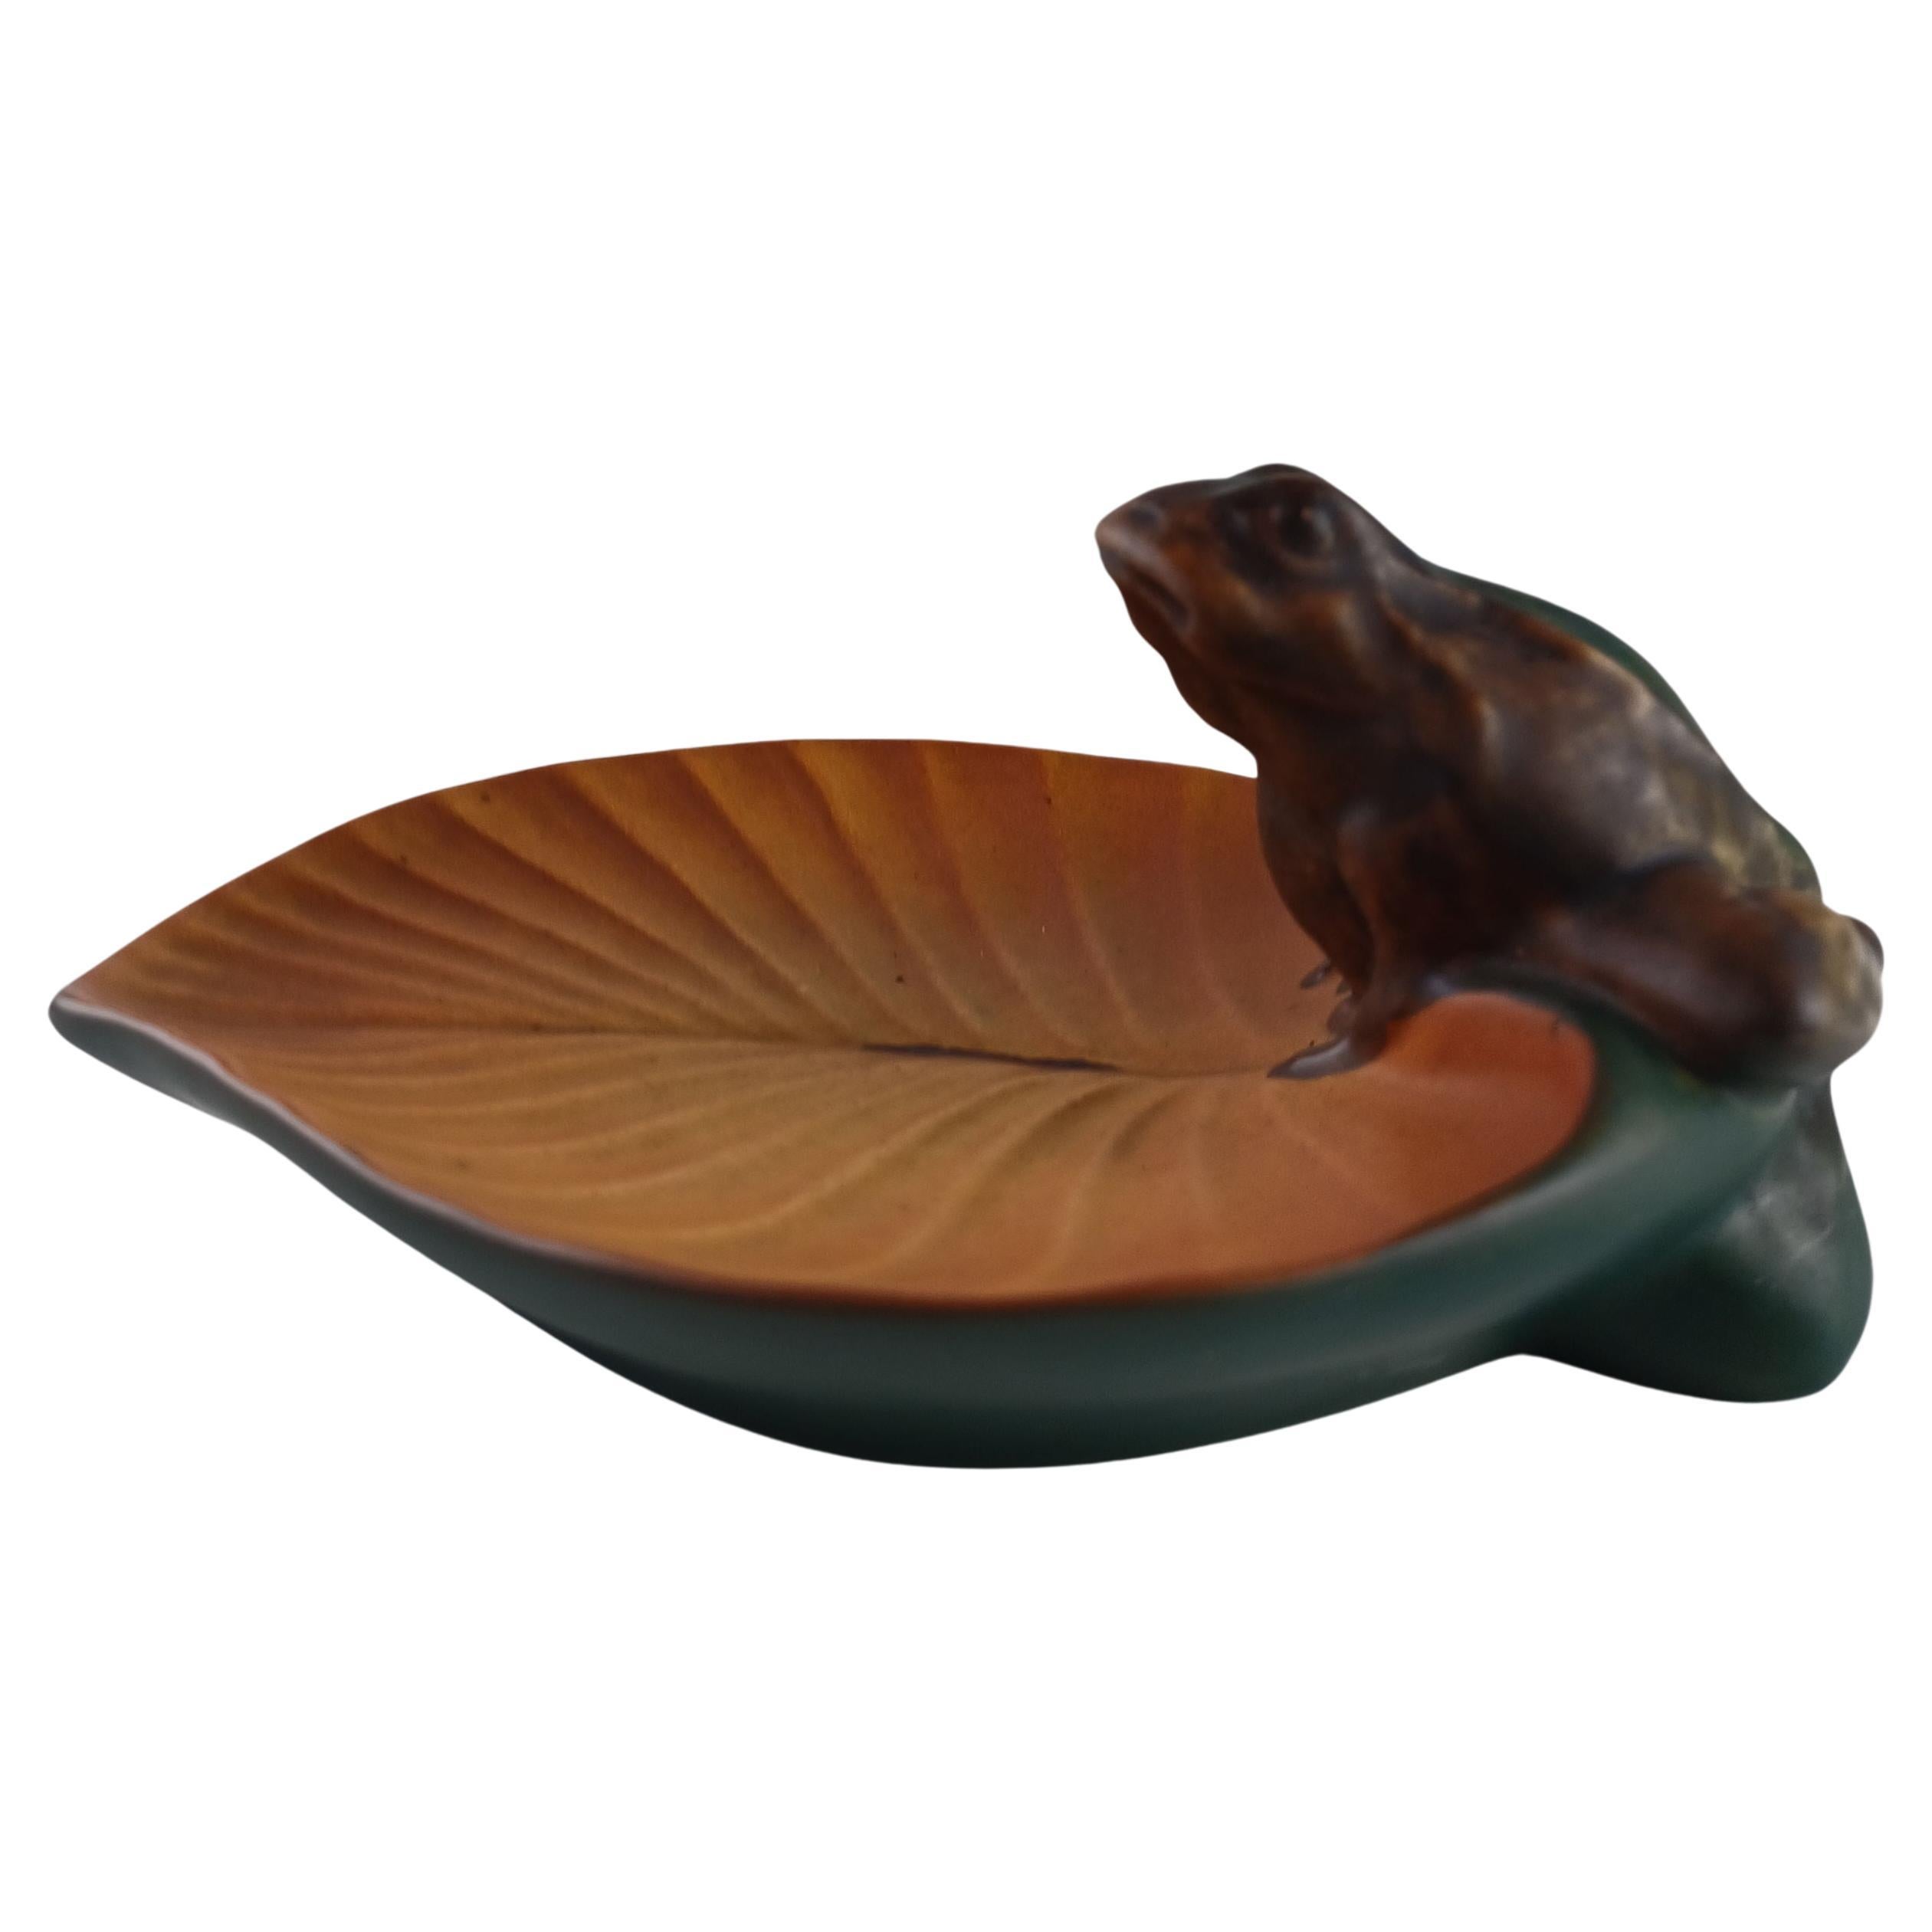 1920's Small Handcrafed Danish Art Nouveau Handcrafted Frog Dish by Ipsens Enke